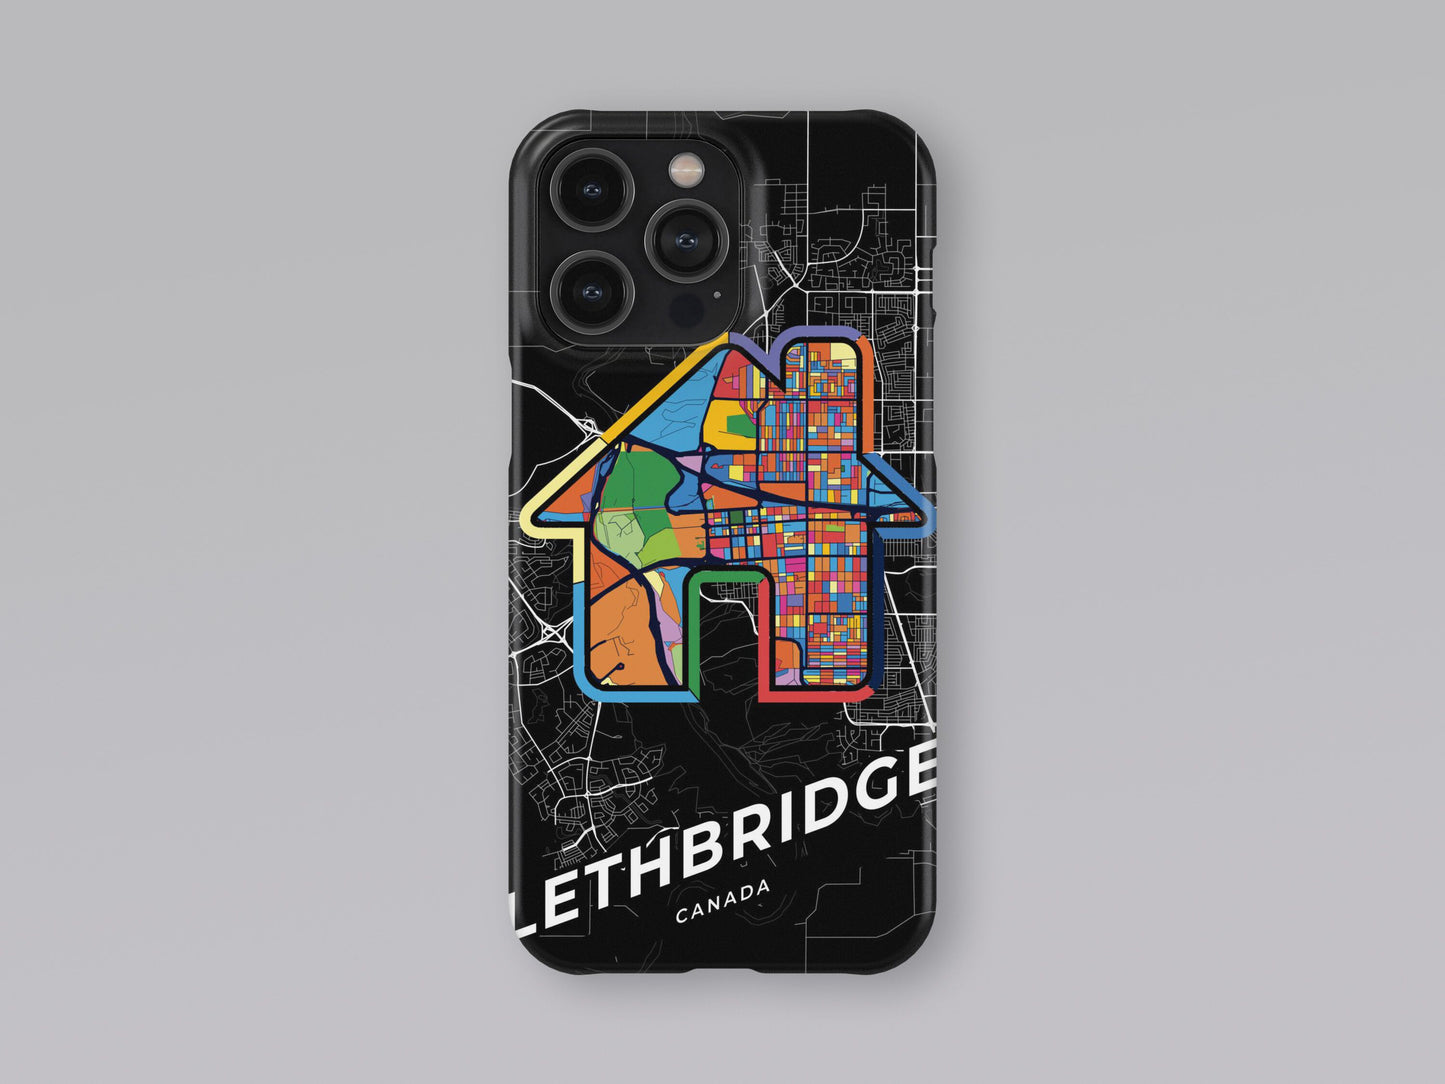 Lethbridge Canada slim phone case with colorful icon. Birthday, wedding or housewarming gift. Couple match cases. 3